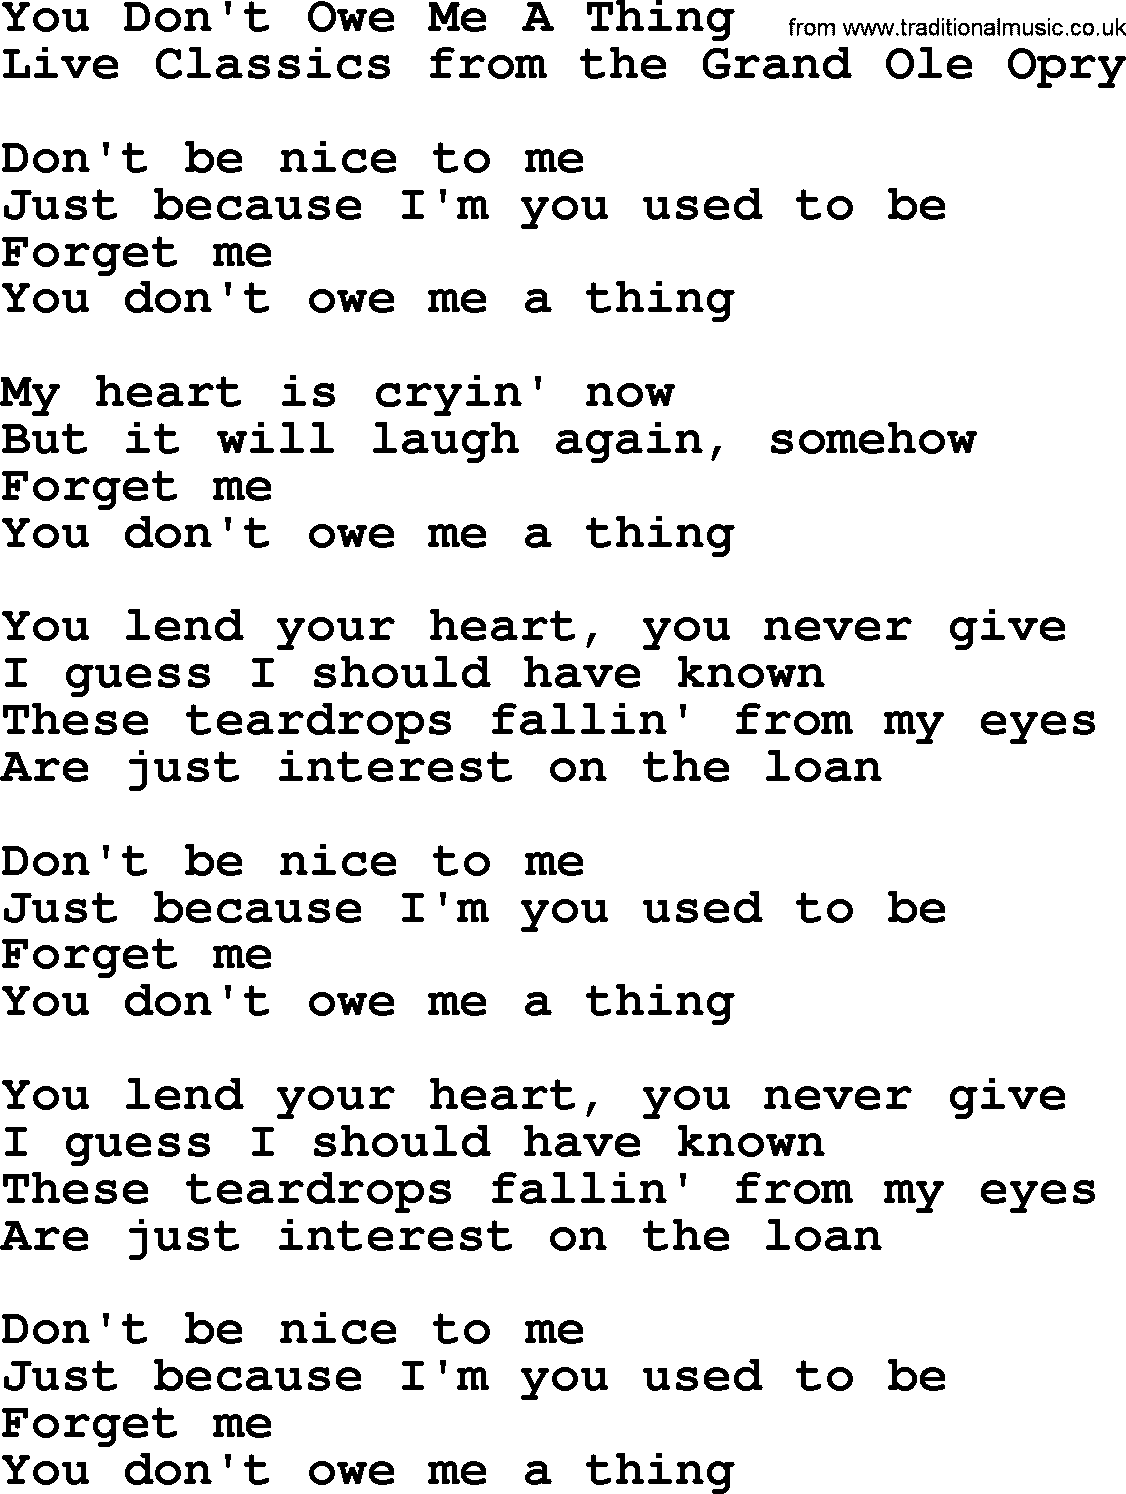 Marty Robbins song: You Don't Owe Me A Thing, lyrics